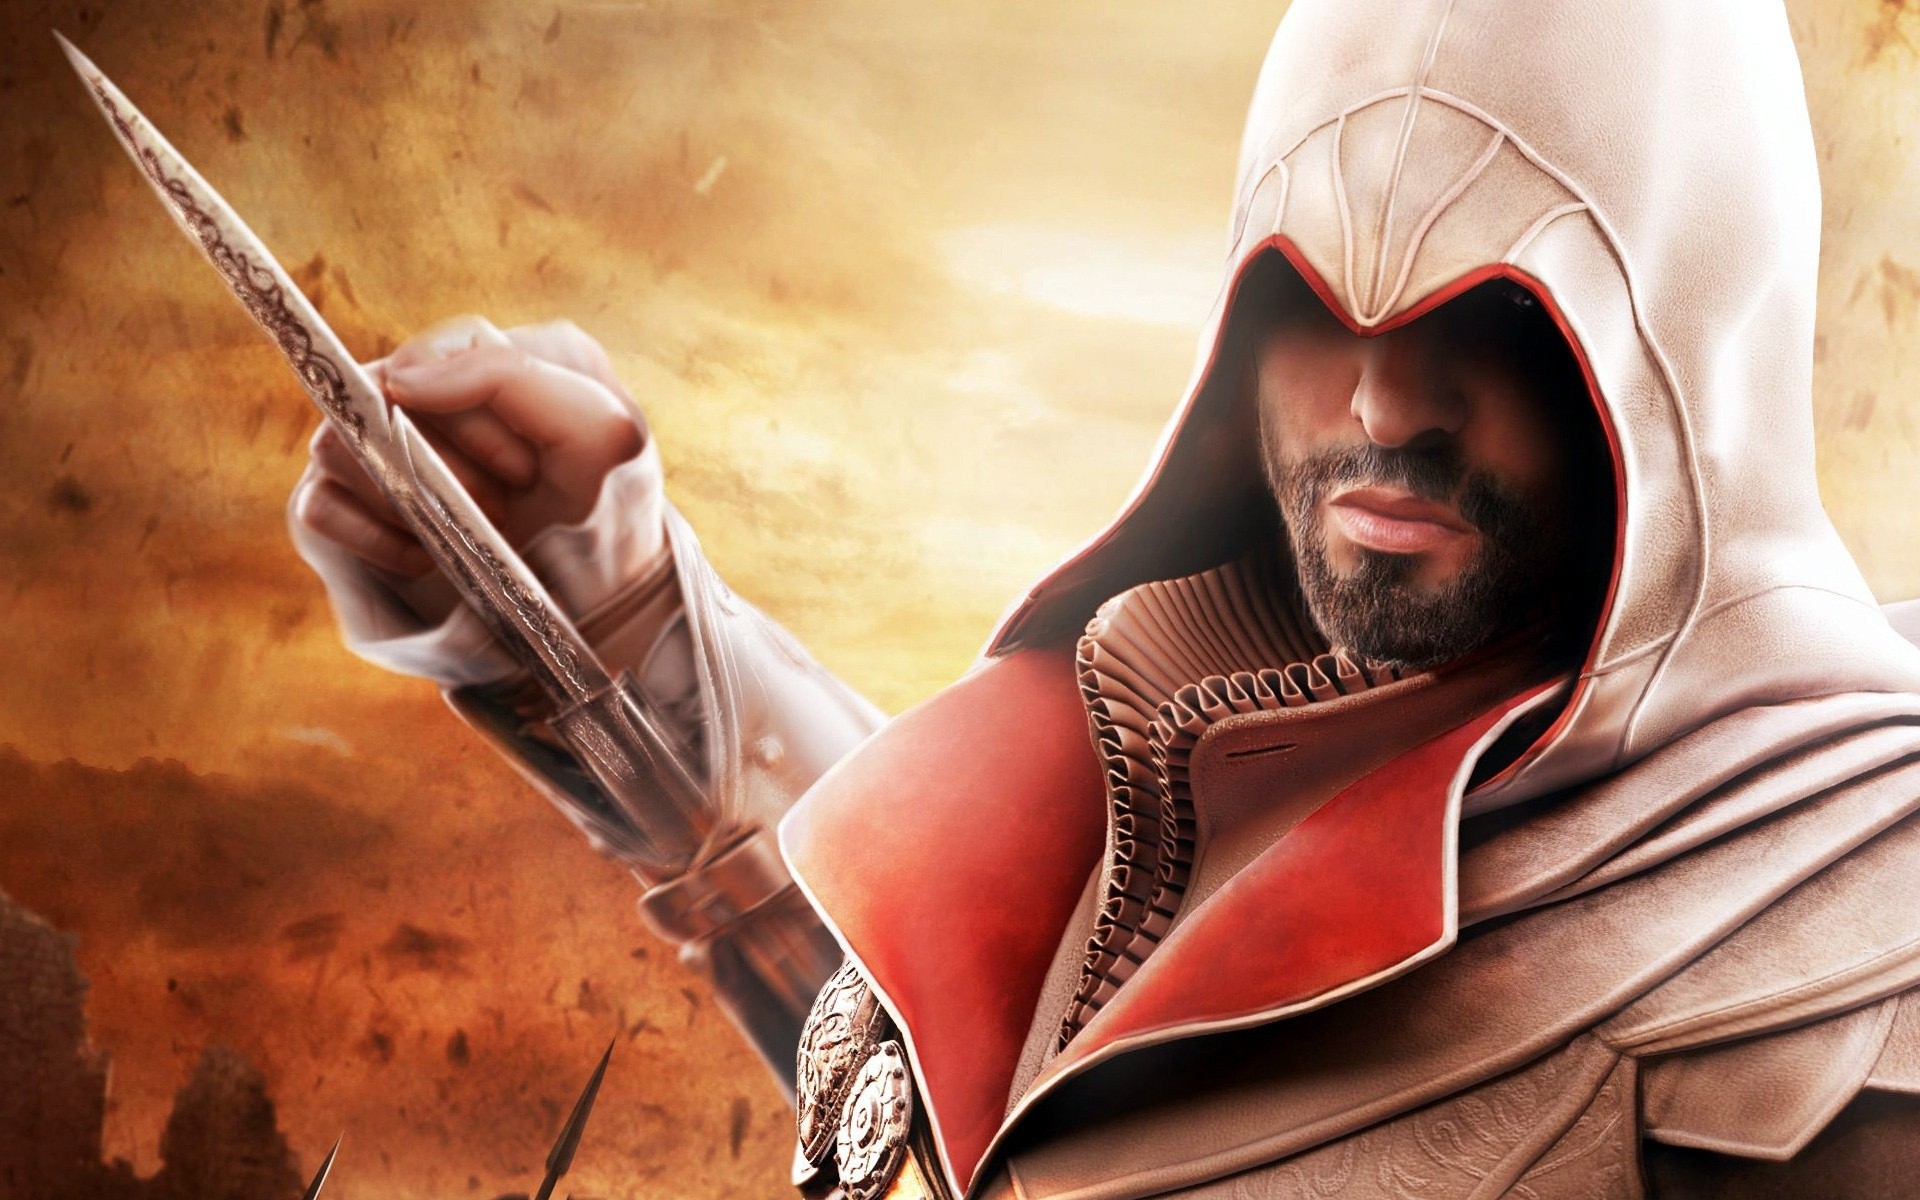 Free HD video game, assassin's creed: brotherhood, ezio (assassin's creed), assassin's creed